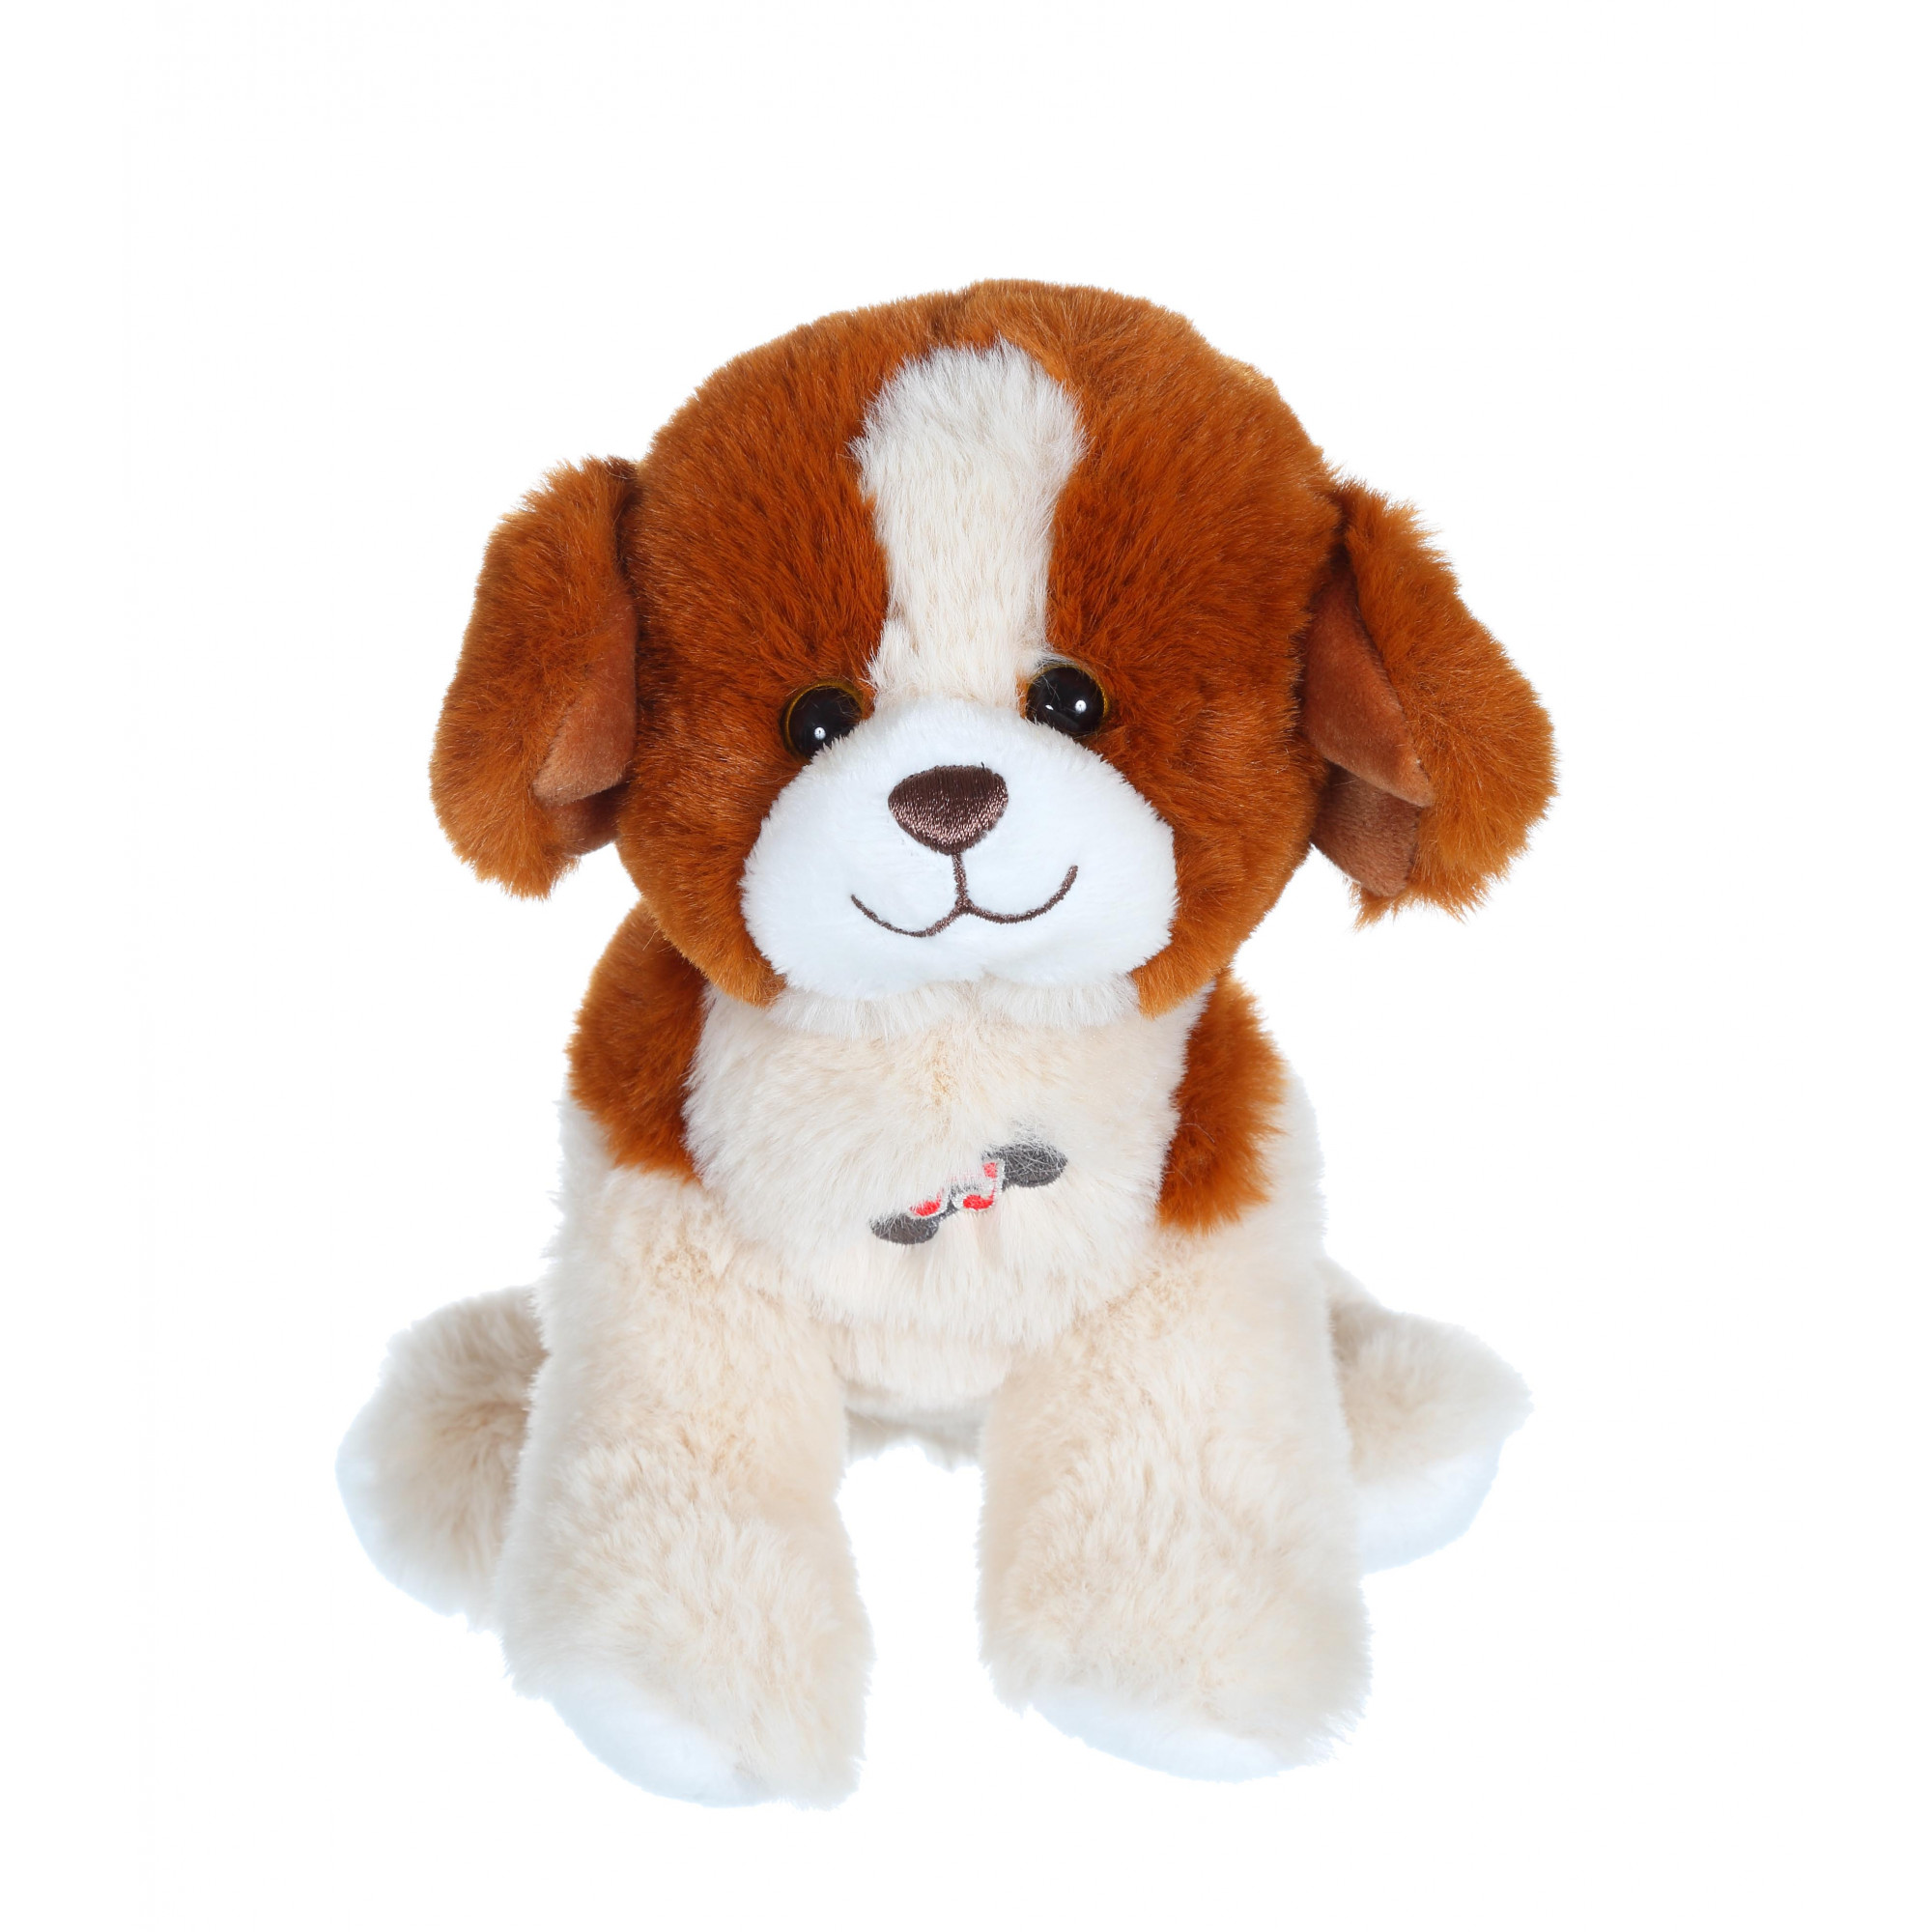 Dogz & Kats with sound 18 cm - beige and brown dog